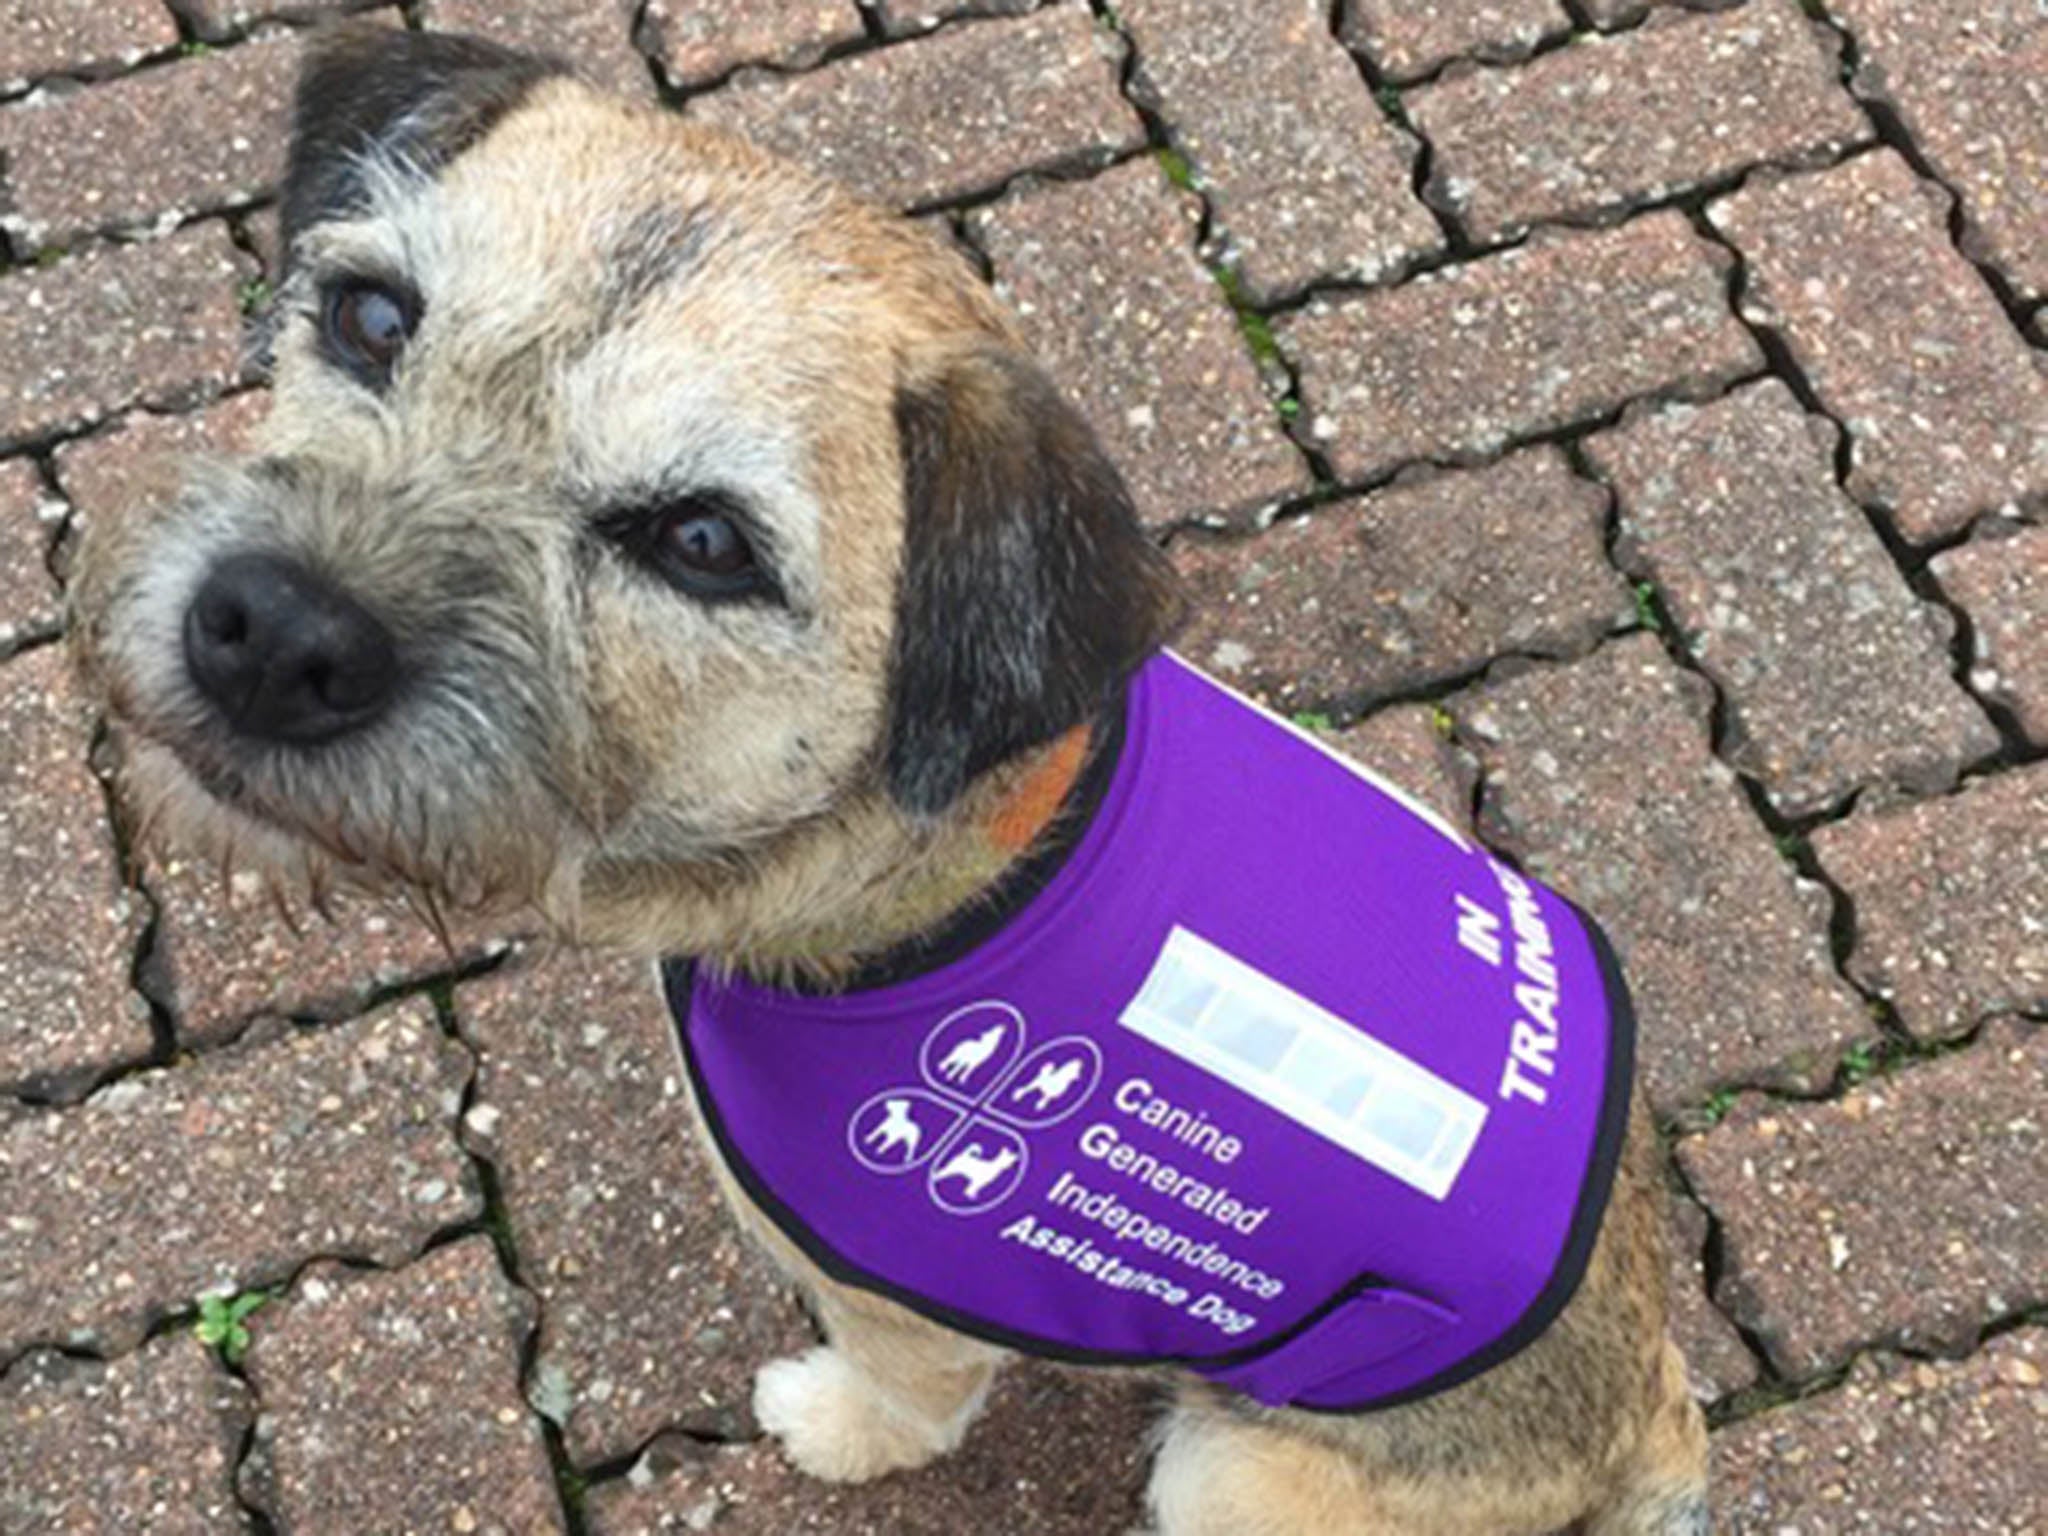 Jack (pictured) has helped his owner Vanessa to live with complex illnesses and find a sense of self, companionship and stability